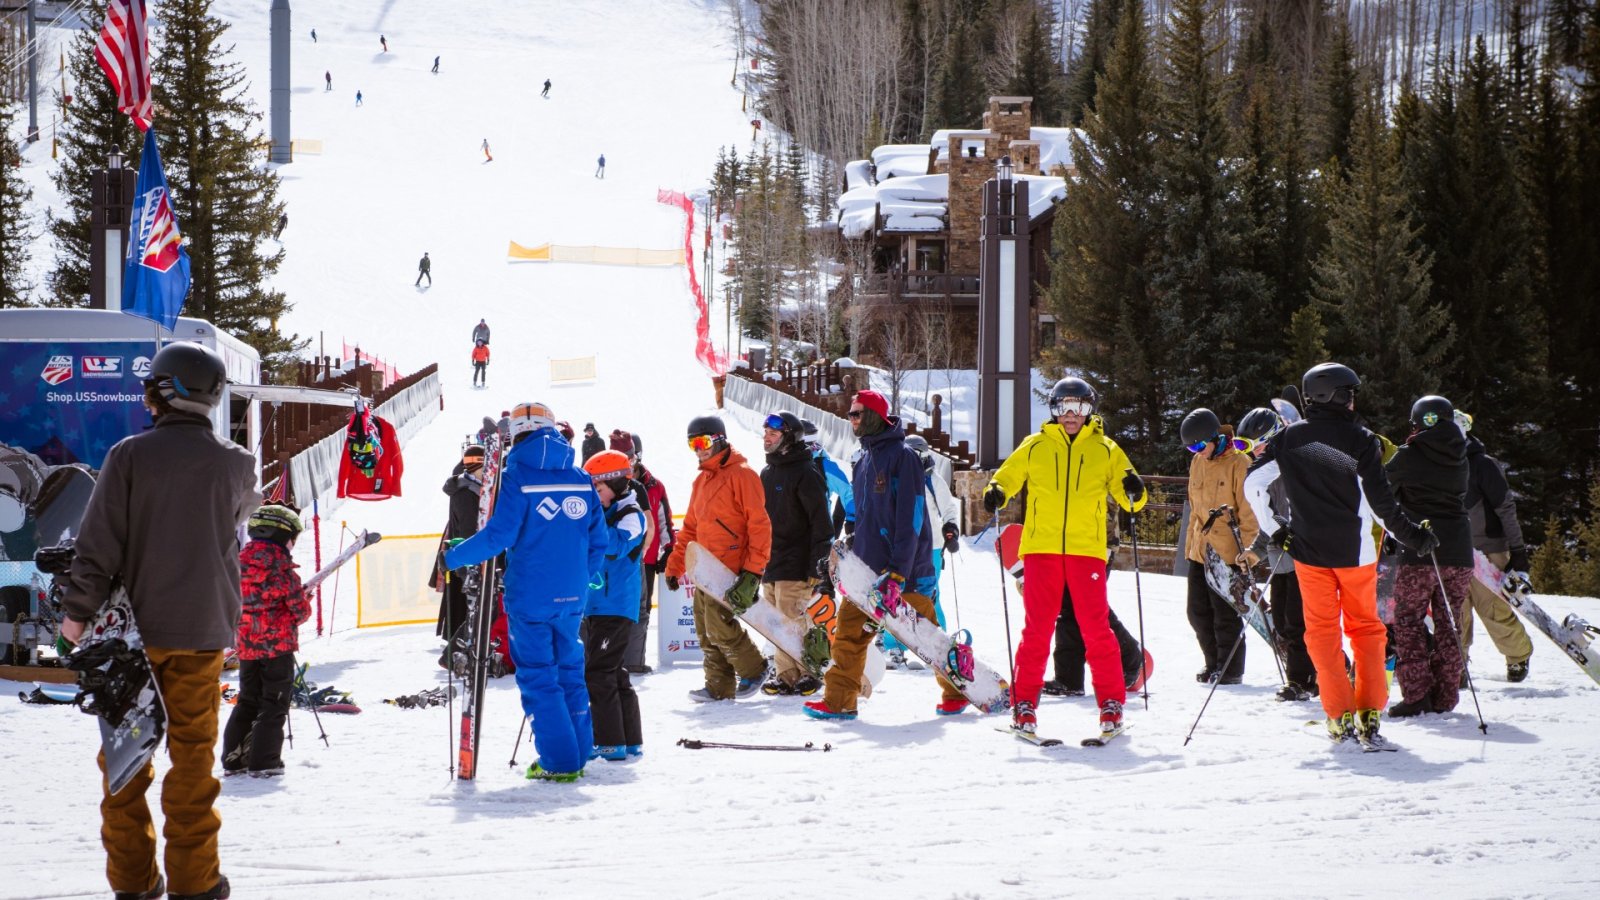 How to find the best family ski resorts for all ability levels